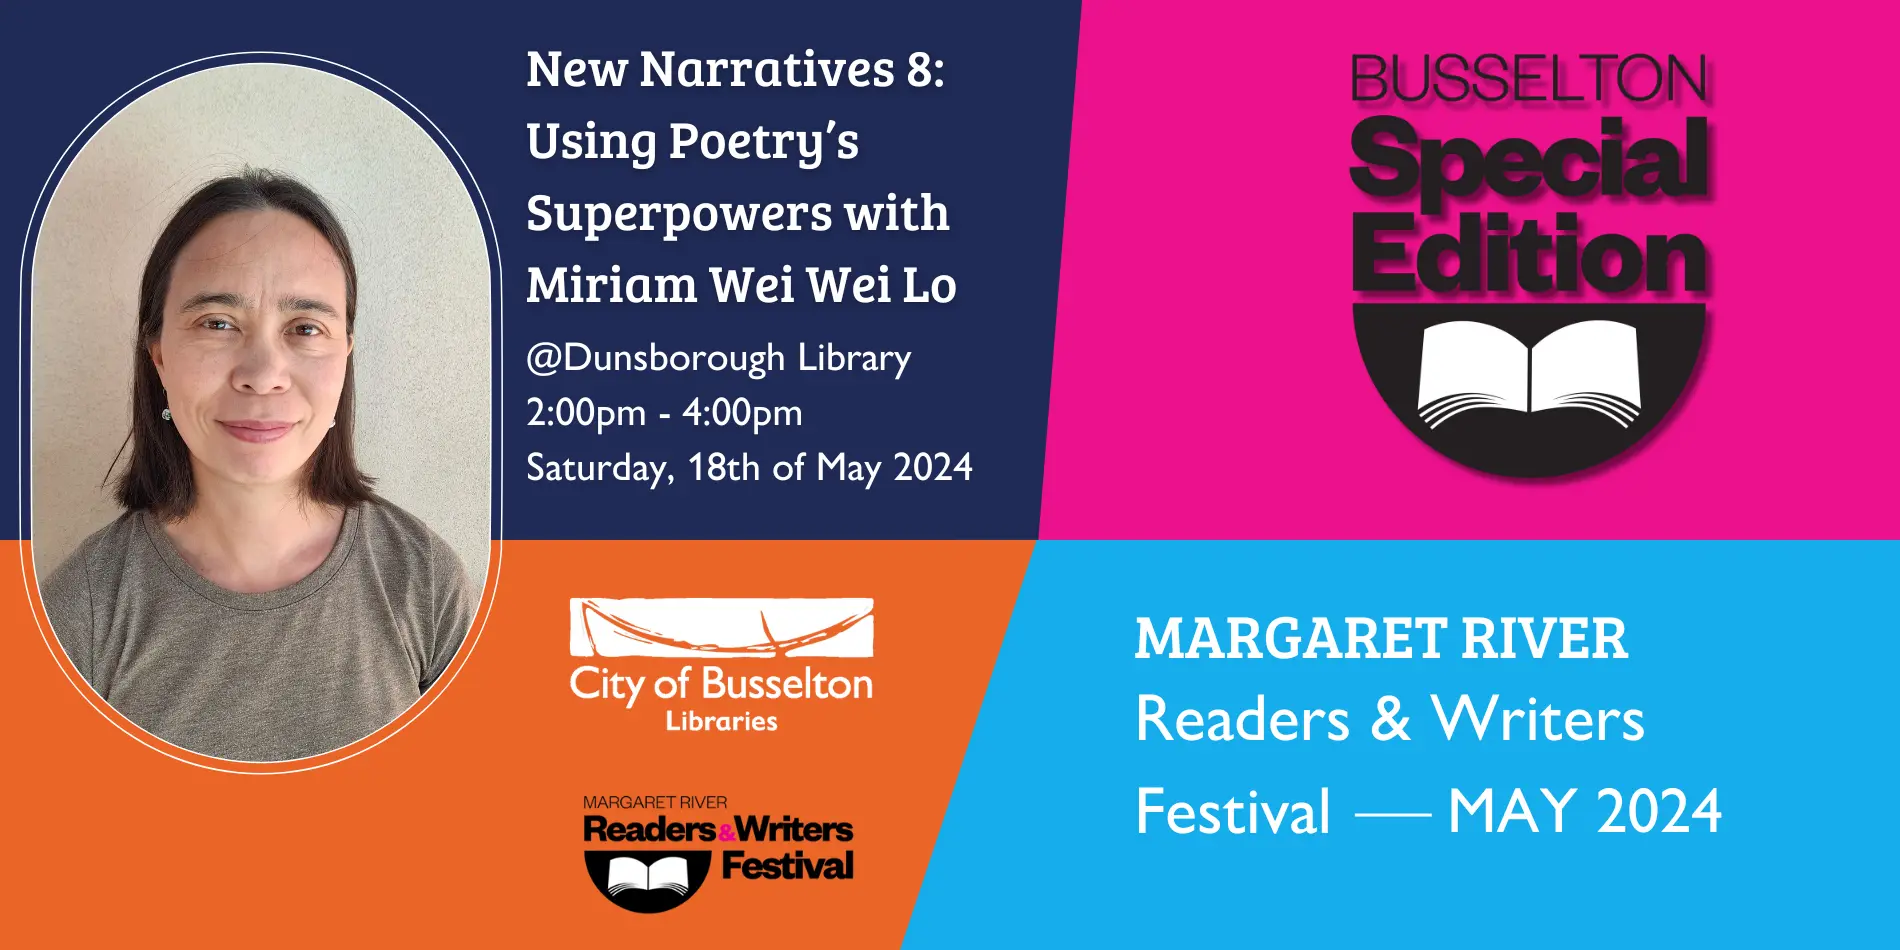 Miriam Wei Wei Lo will be hosting a poetry workshop at the Dunsborough Library on the 18th of May.